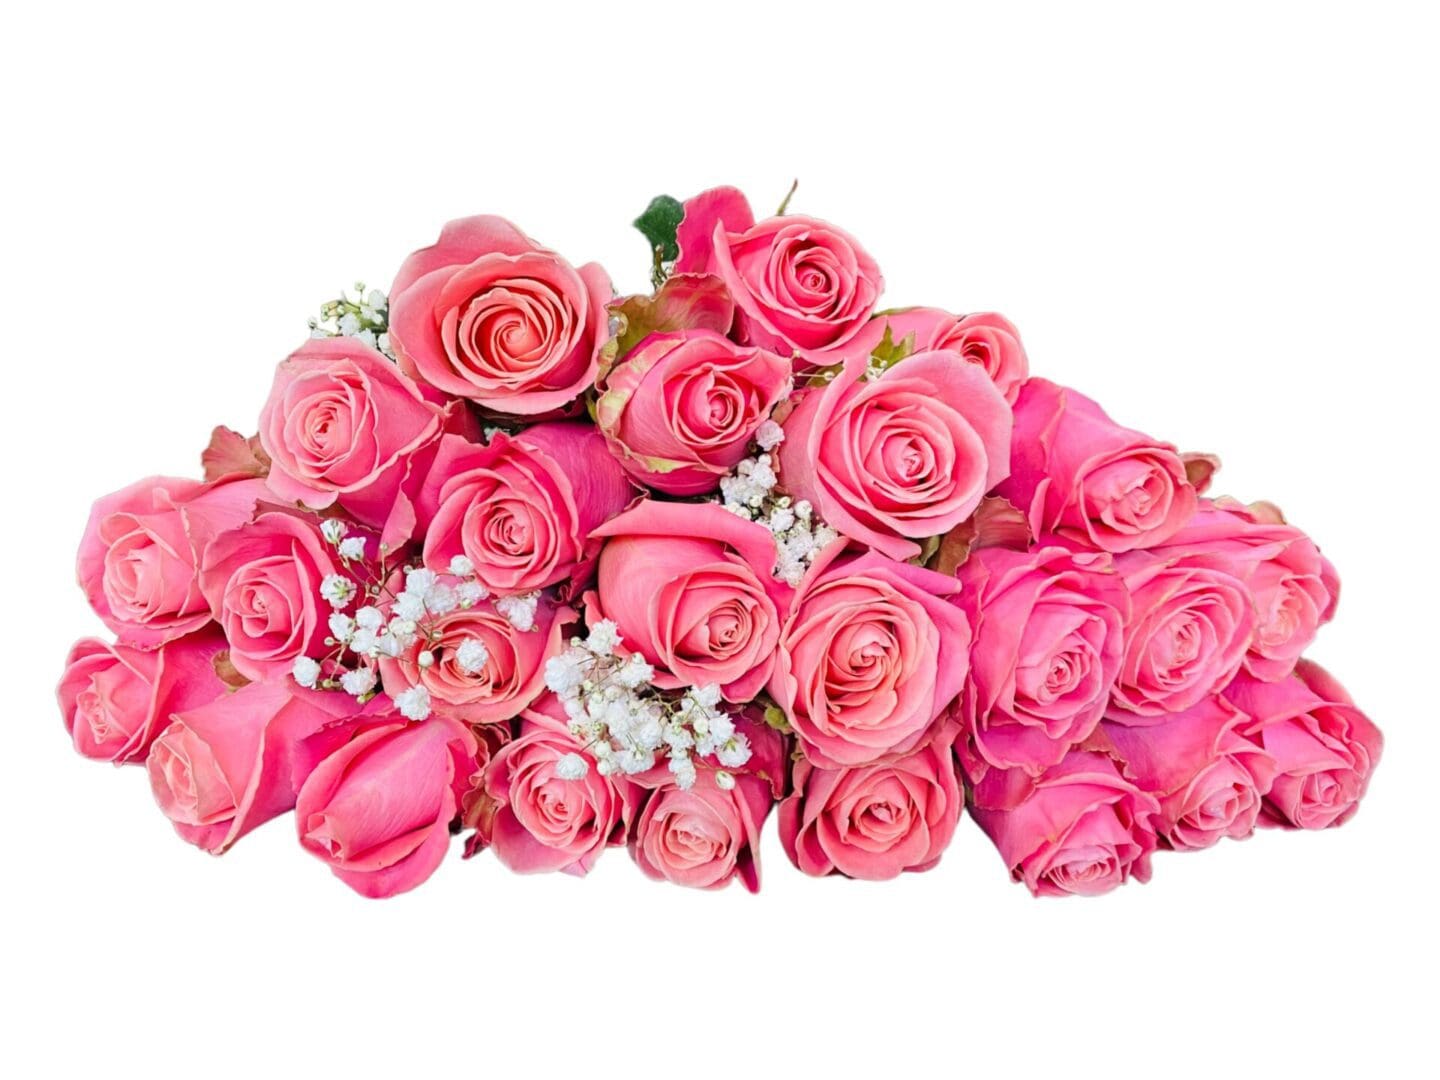 12 pink Hermosa roses bouquet on a white background